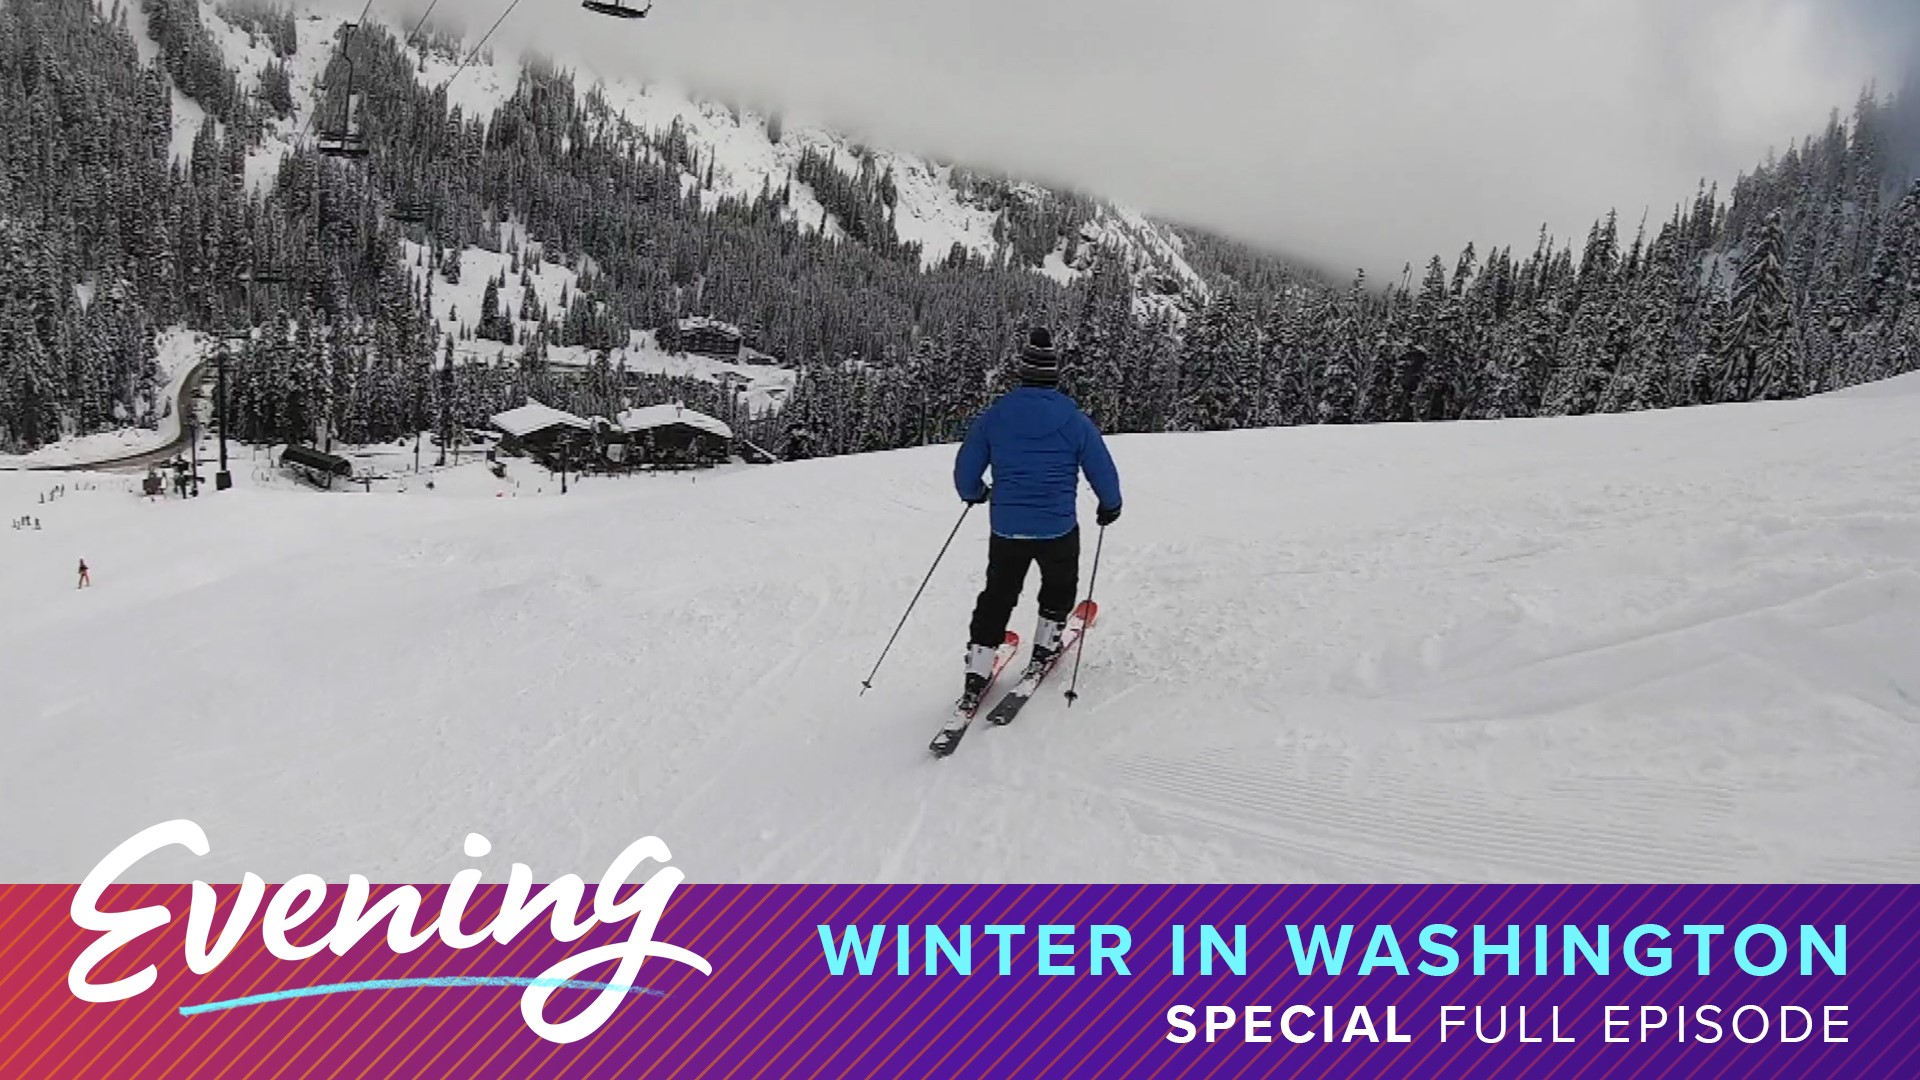 It's time to hit the slopes because winter in Washington is truly a wonderland!